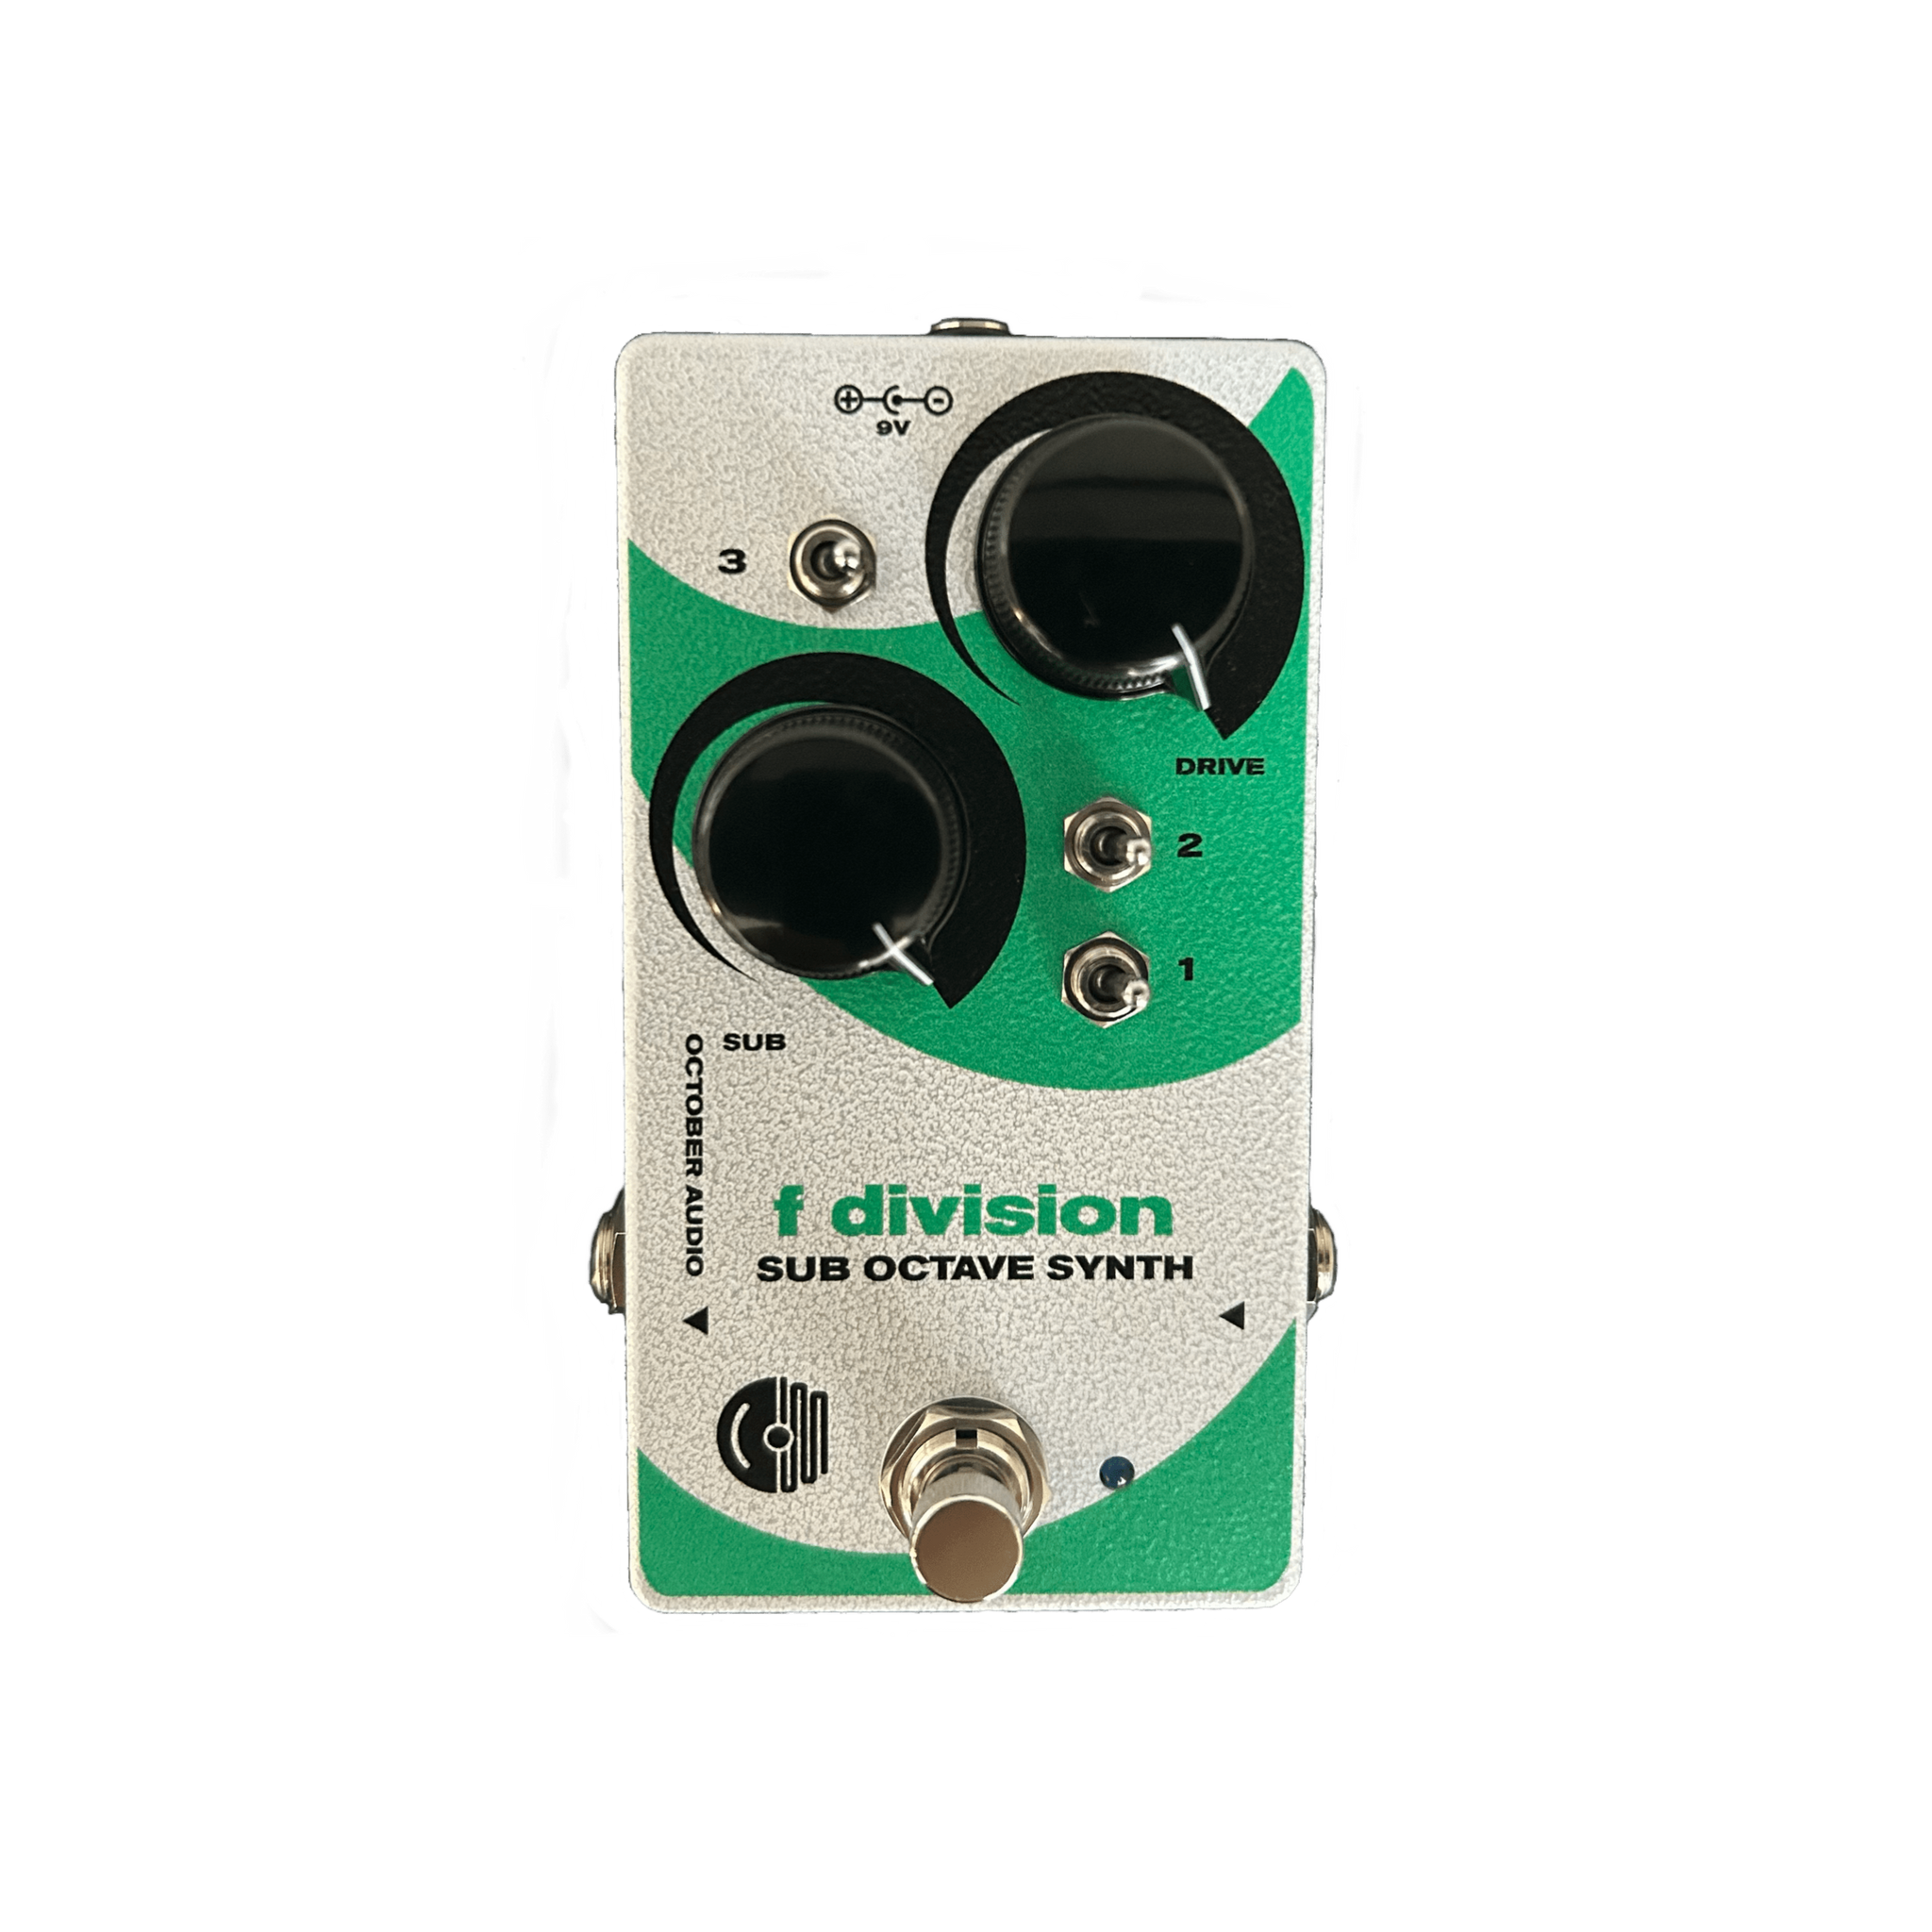 f division- sub octave synth